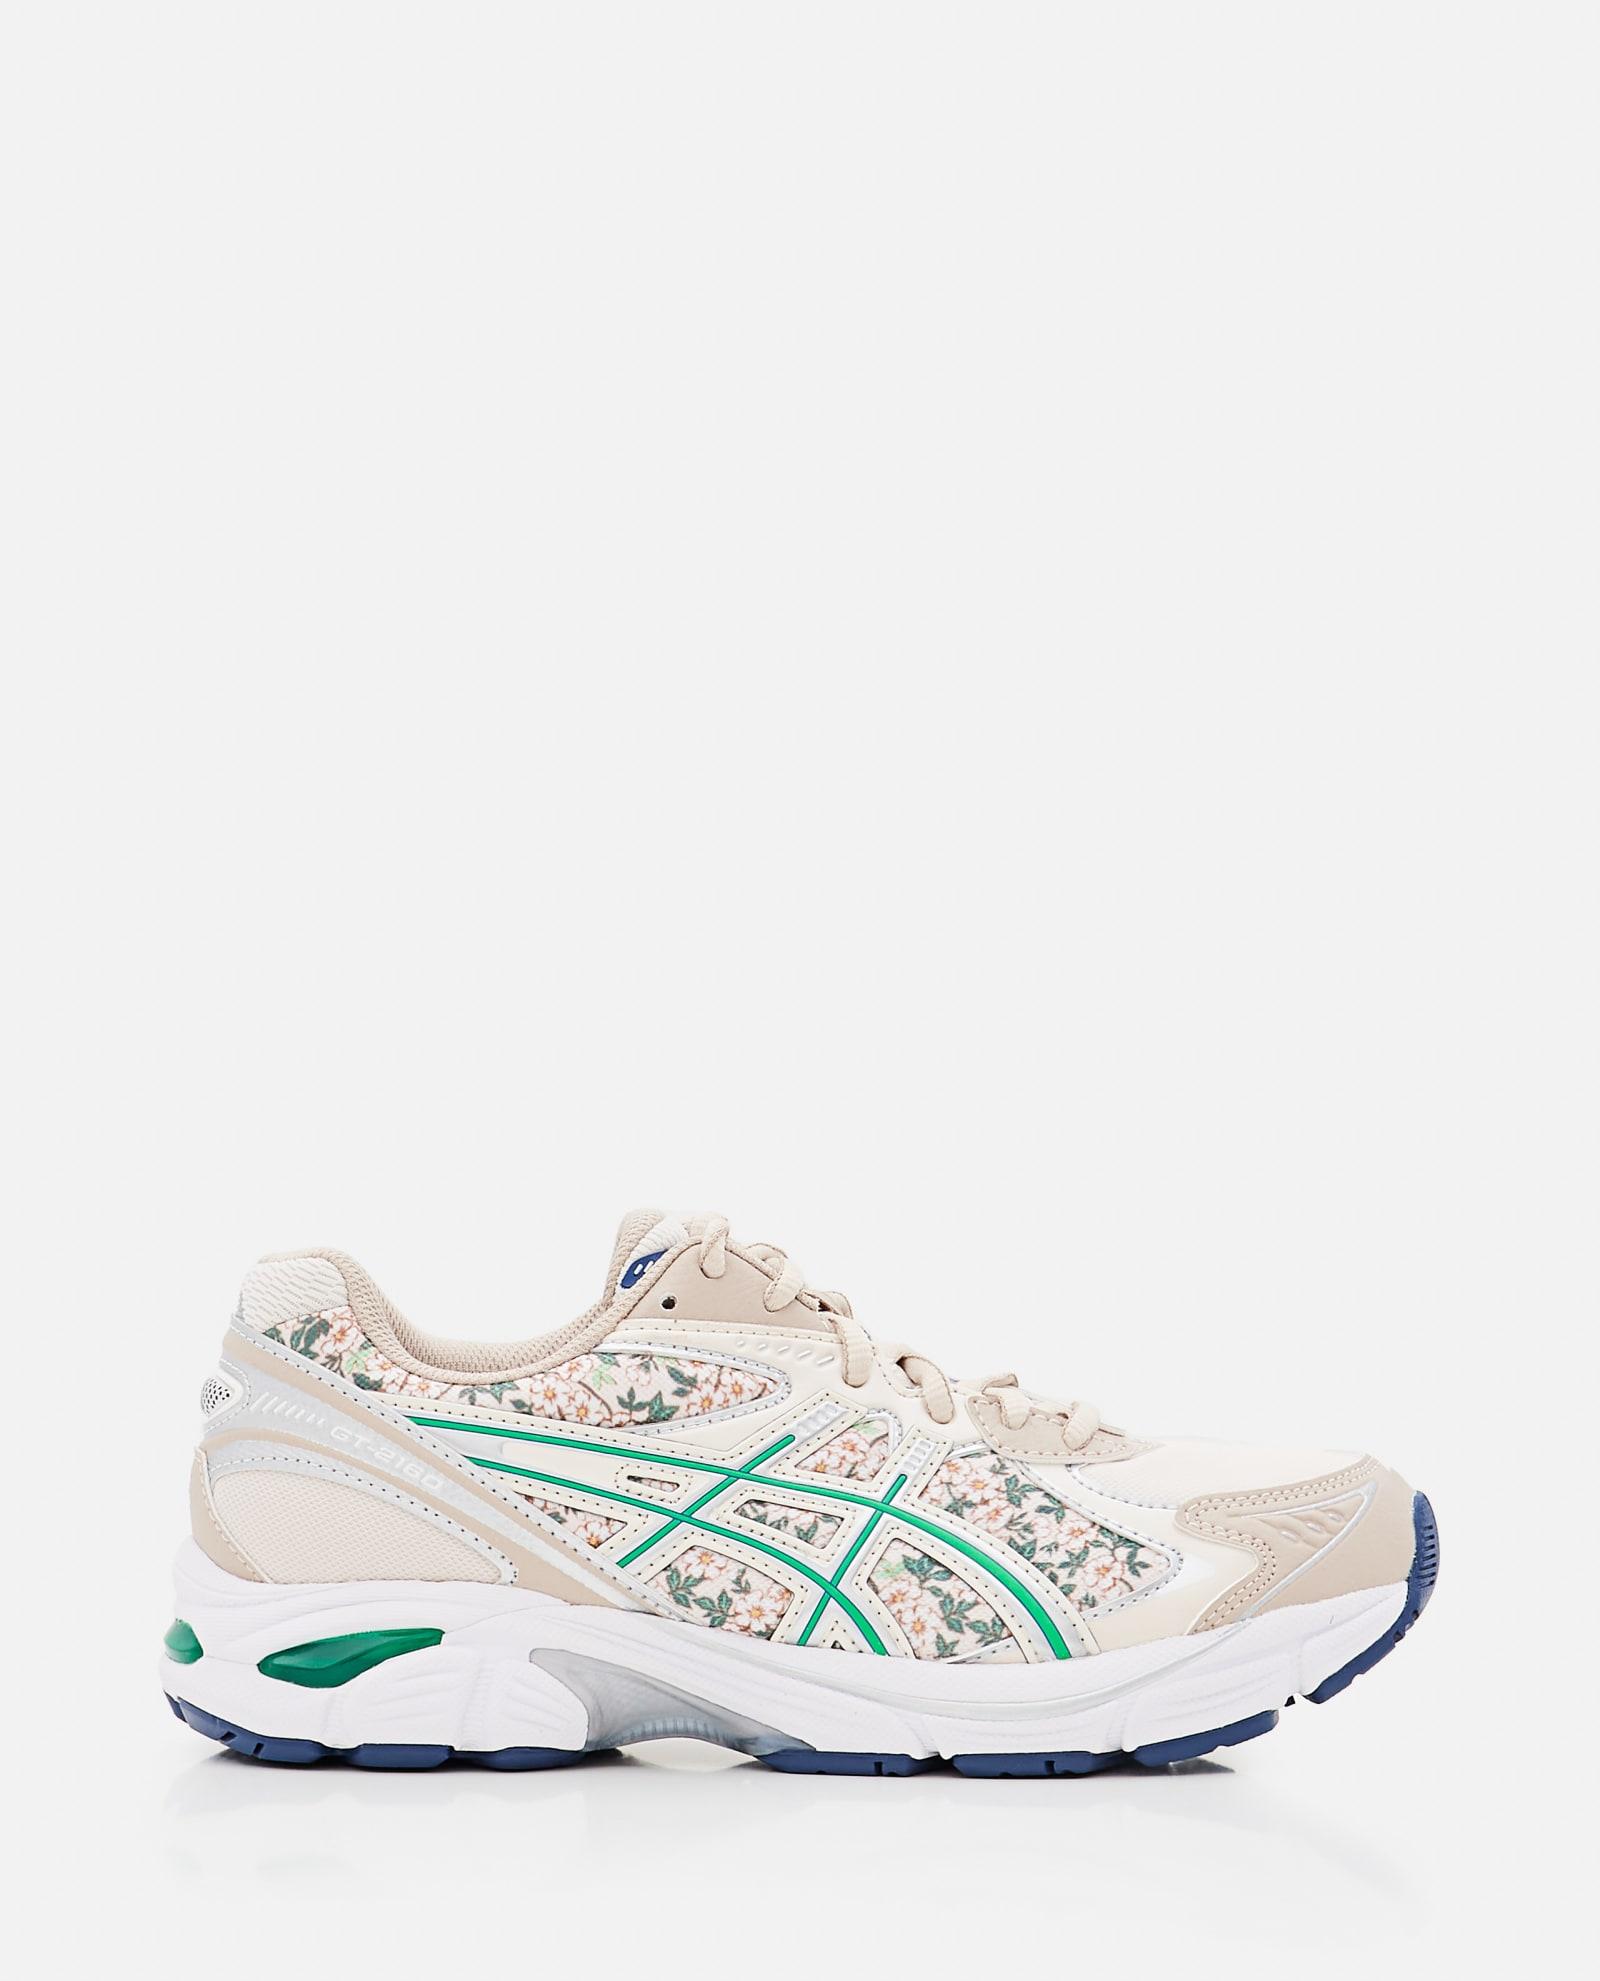 Asics Gt-2160 Sneakers in White | Lyst